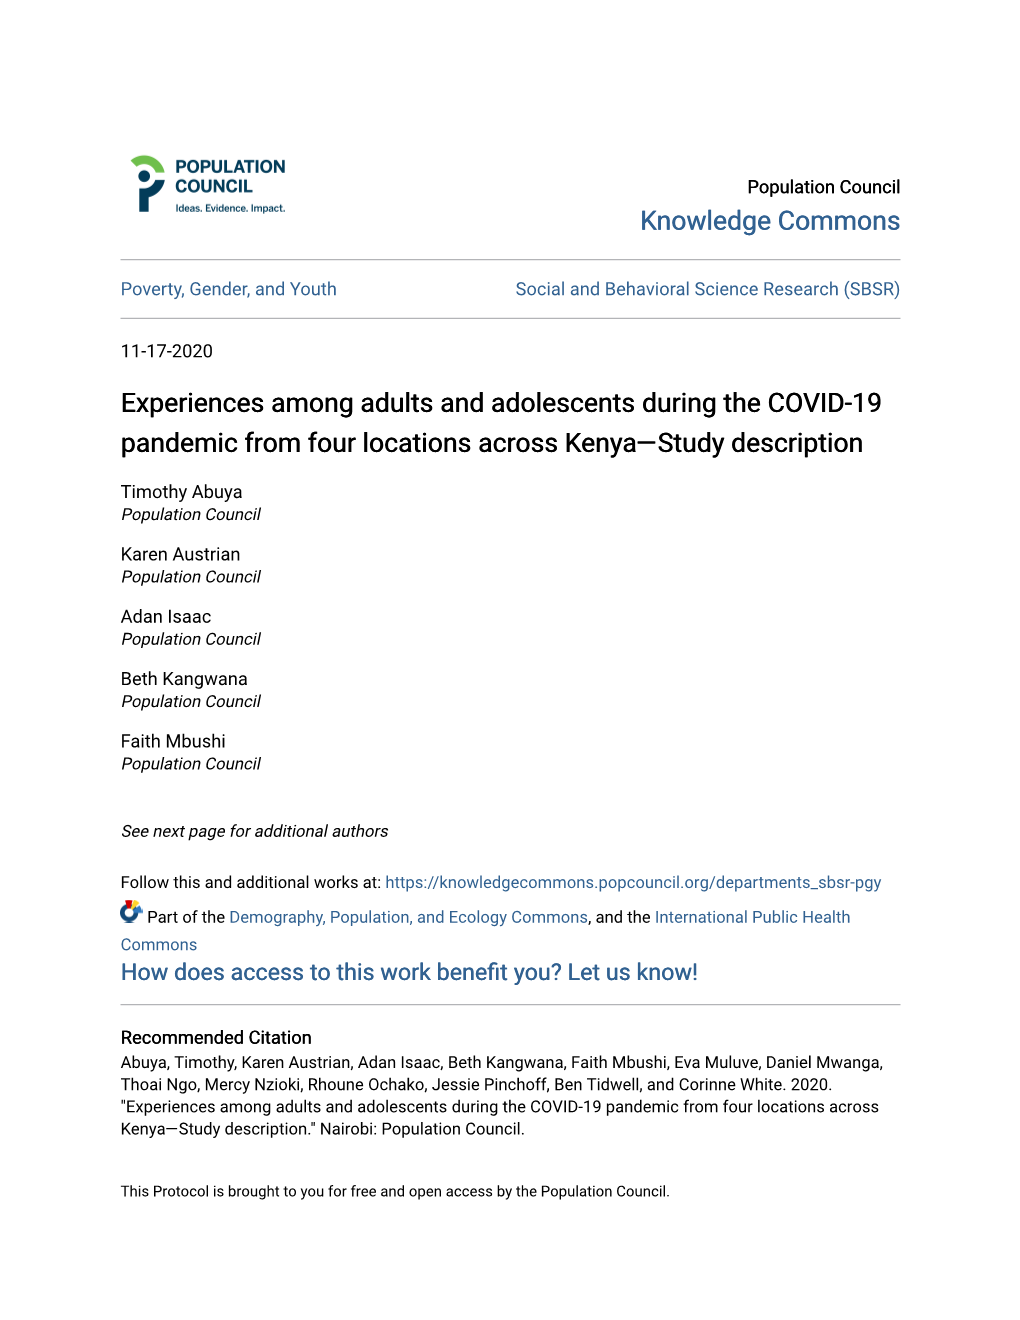 Experiences Among Adults and Adolescents During the COVID-19 Pandemic from Four Locations Across Kenya—Study Description